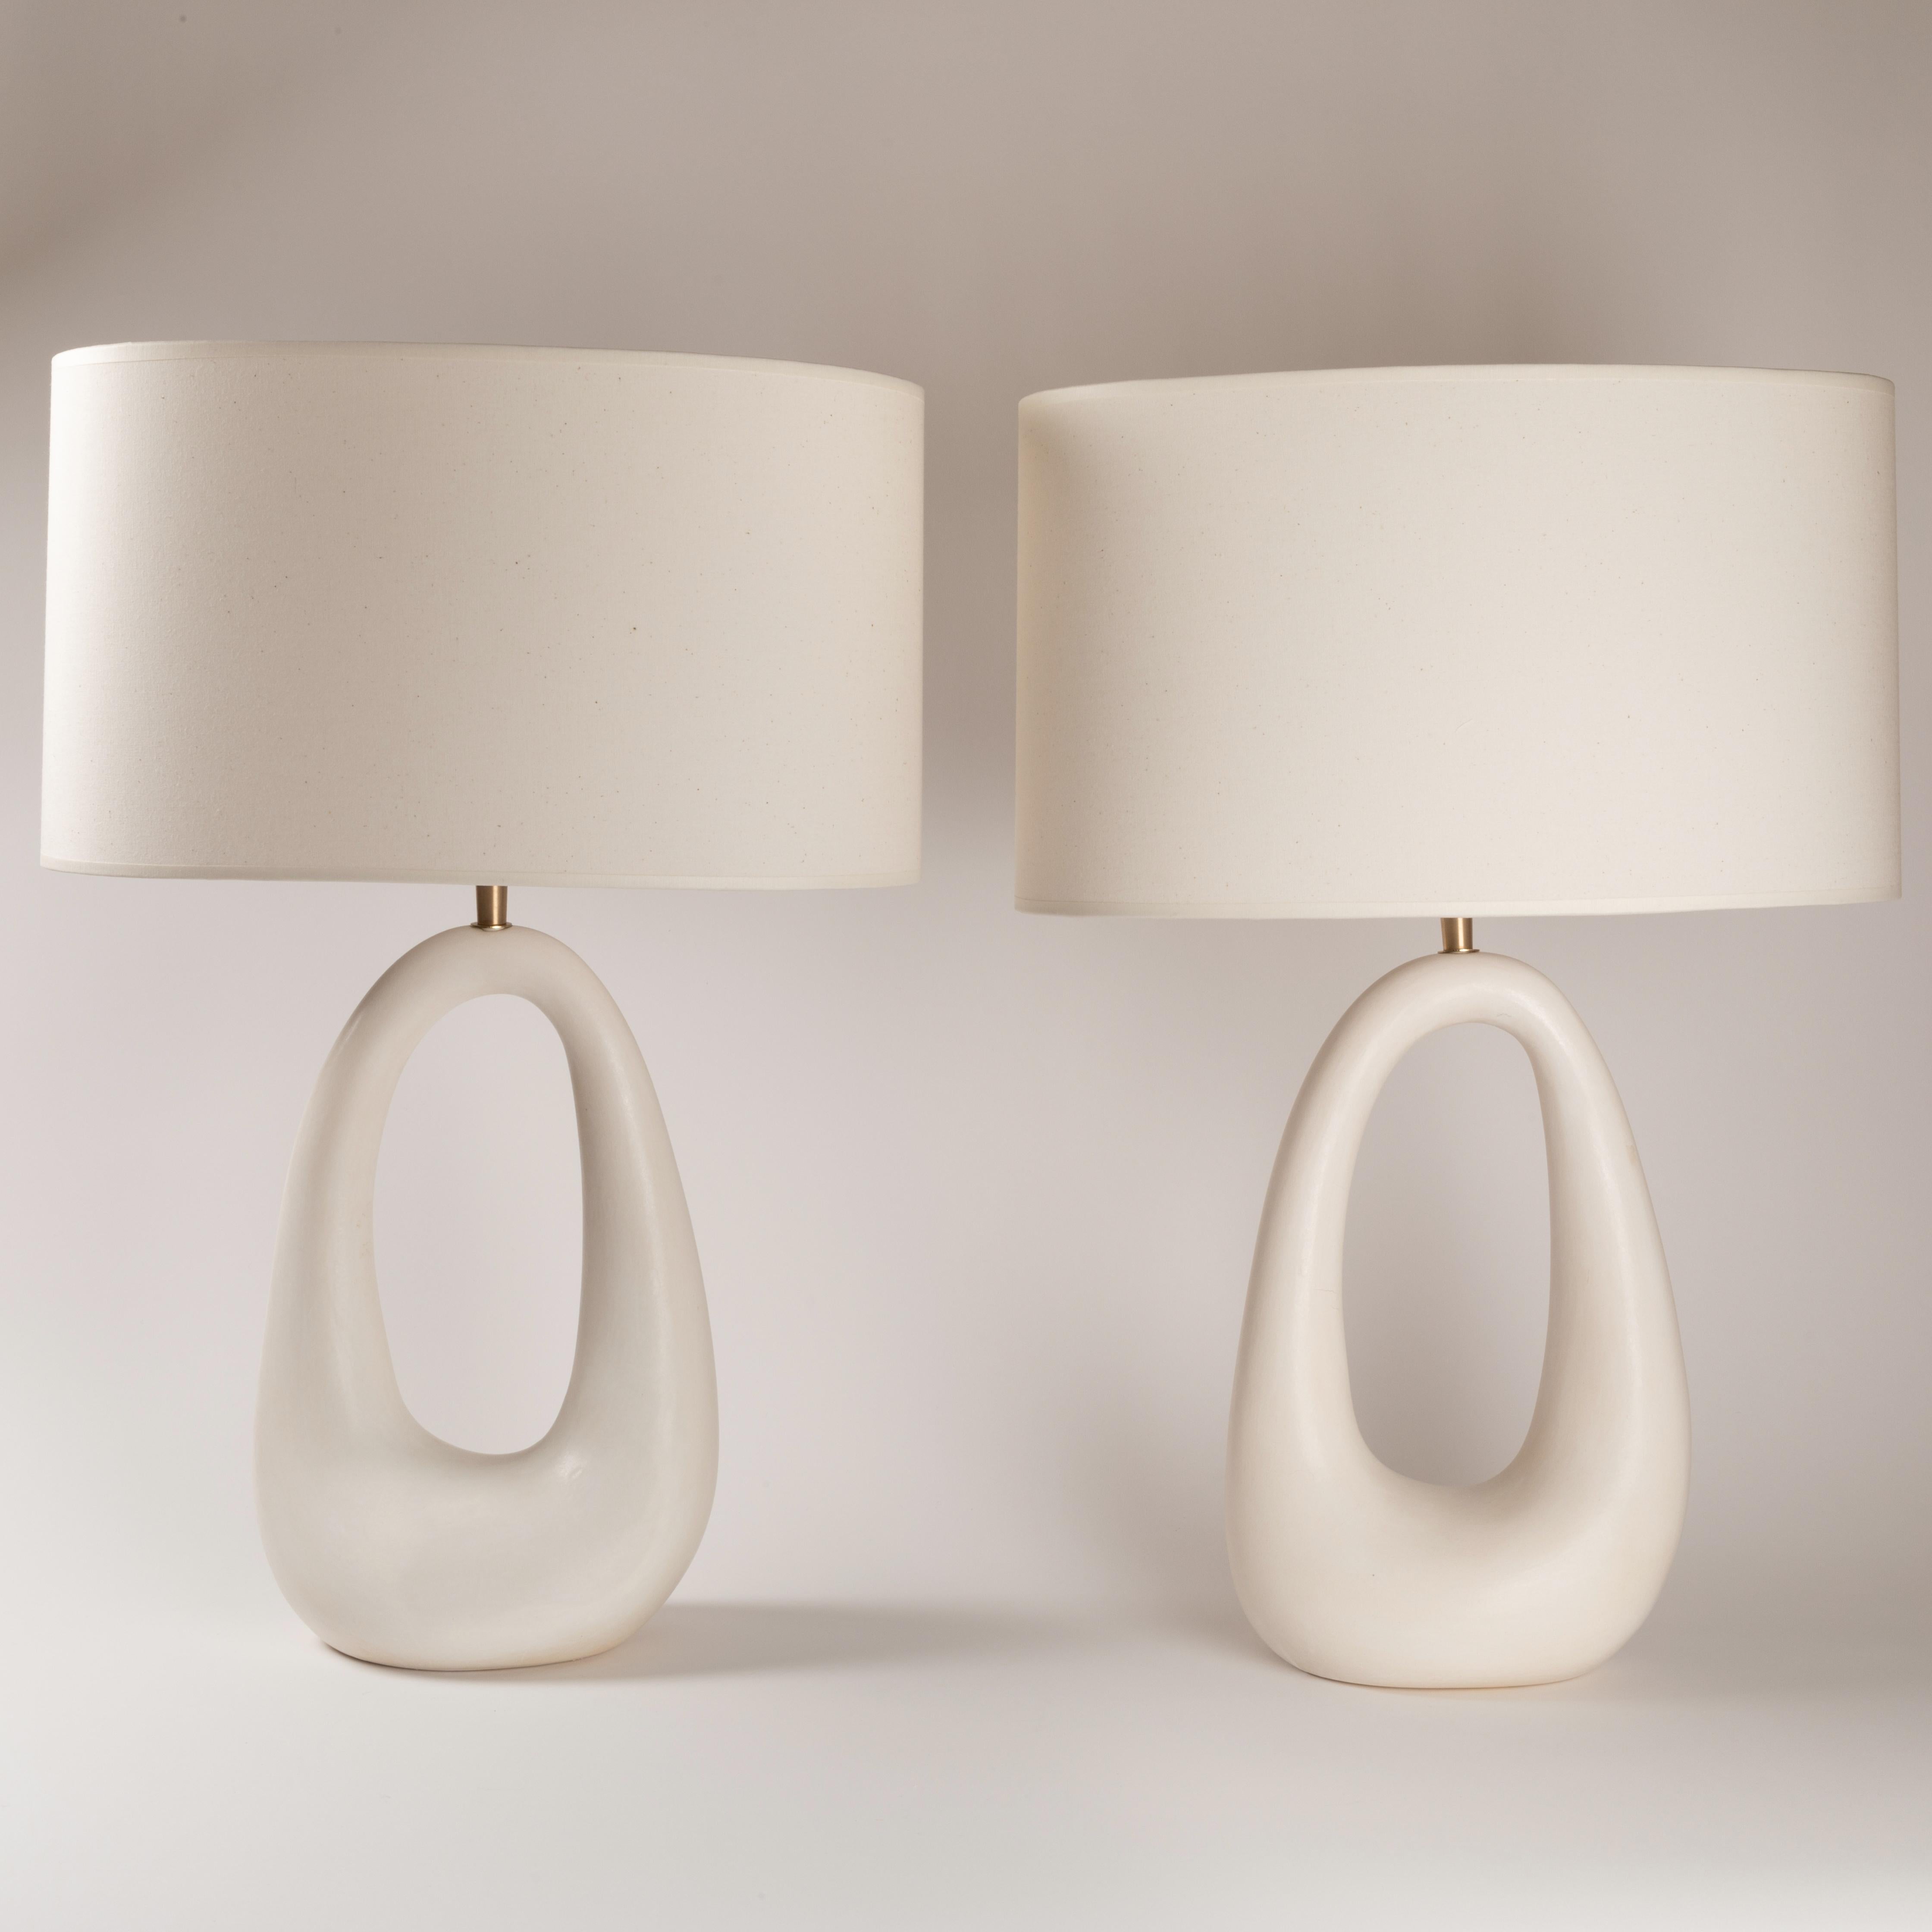 Set of 2 Hypnos table lamps by Elsa Foulon.
Dimensions: D 64 x H 41 cm.
Materials: ceramic, brass, linen.
Unique piece
Also available in different finishes and dimensions.

All our lamps can be wired according to each country. If sold to the USA it